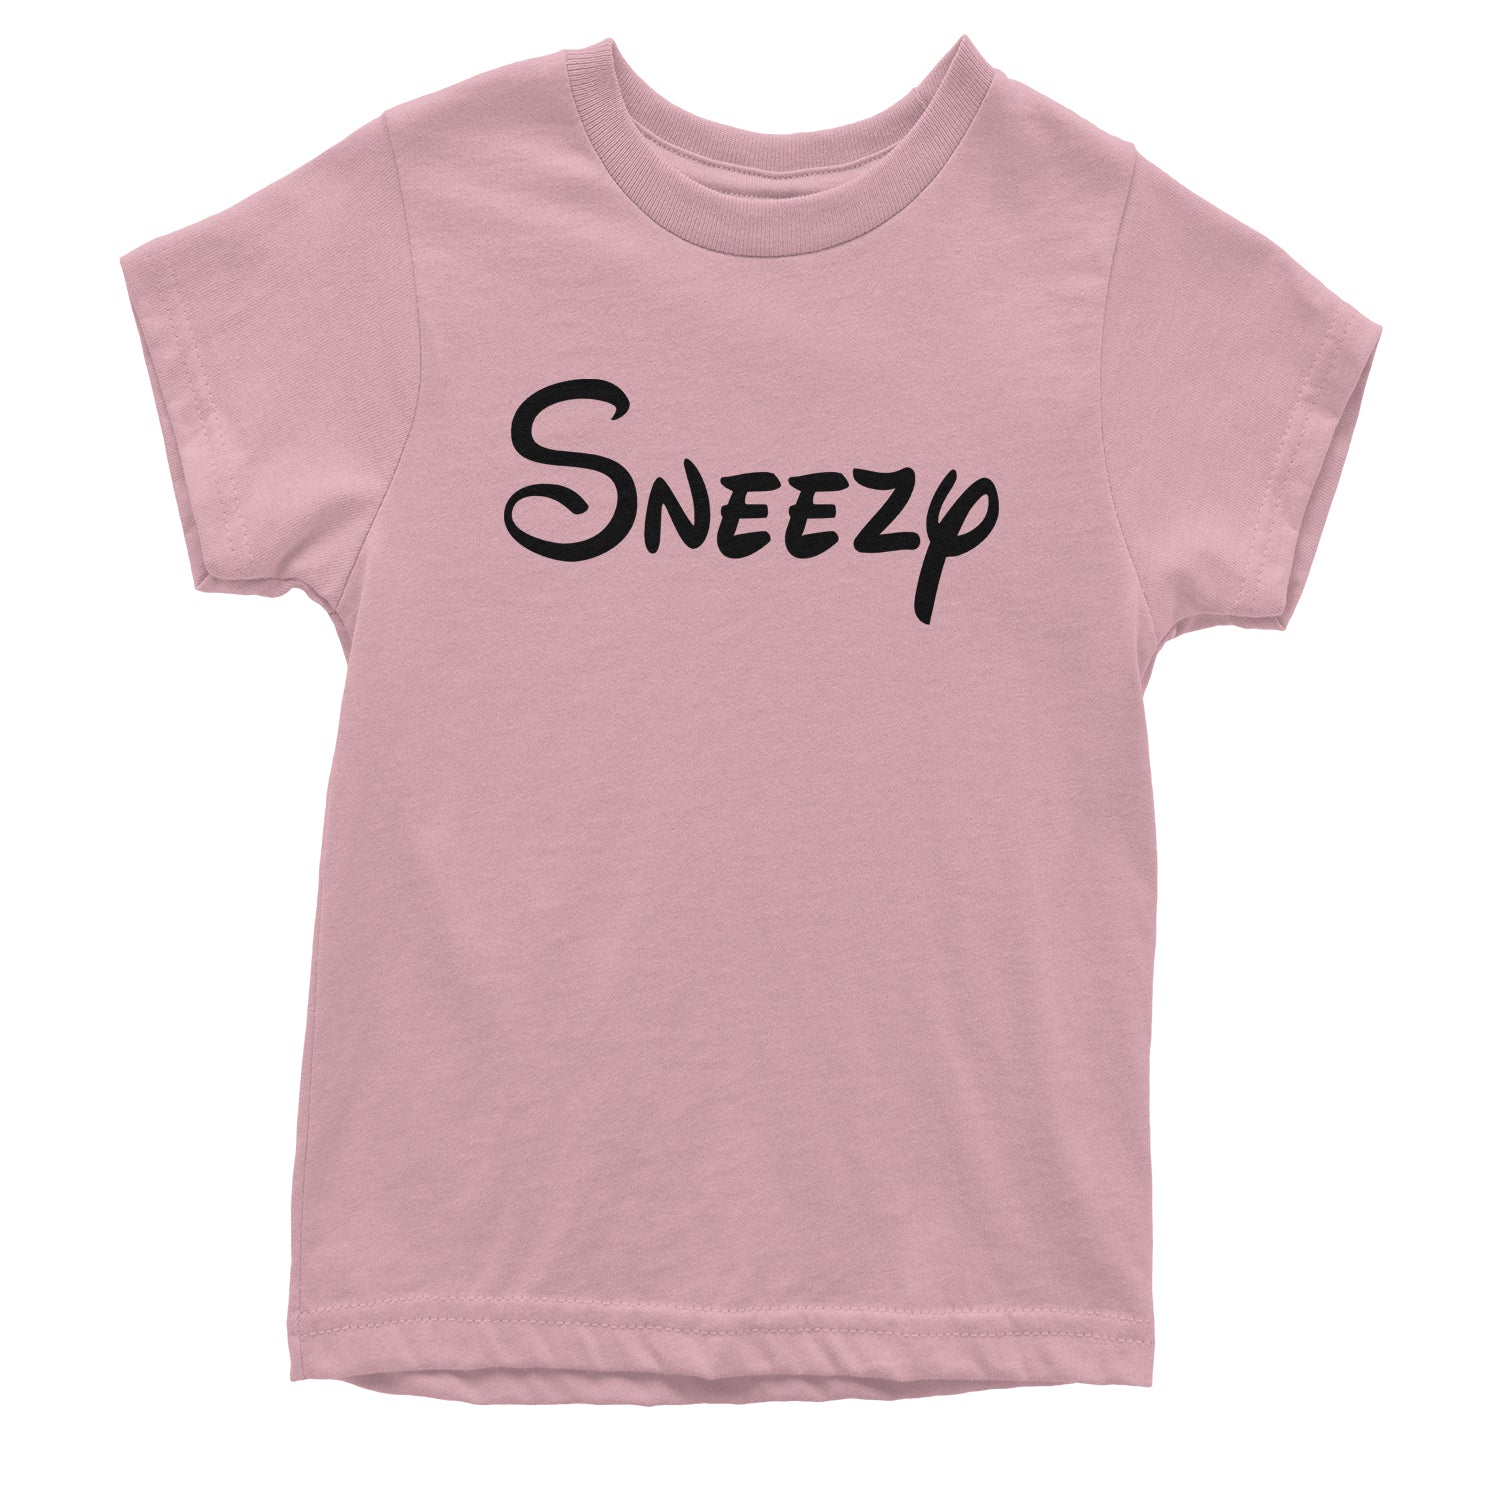 Sneezy - 7 Dwarfs Costume Youth T-shirt and, costume, dwarfs, group, halloween, matching, seven, snow, the, white by Expression Tees